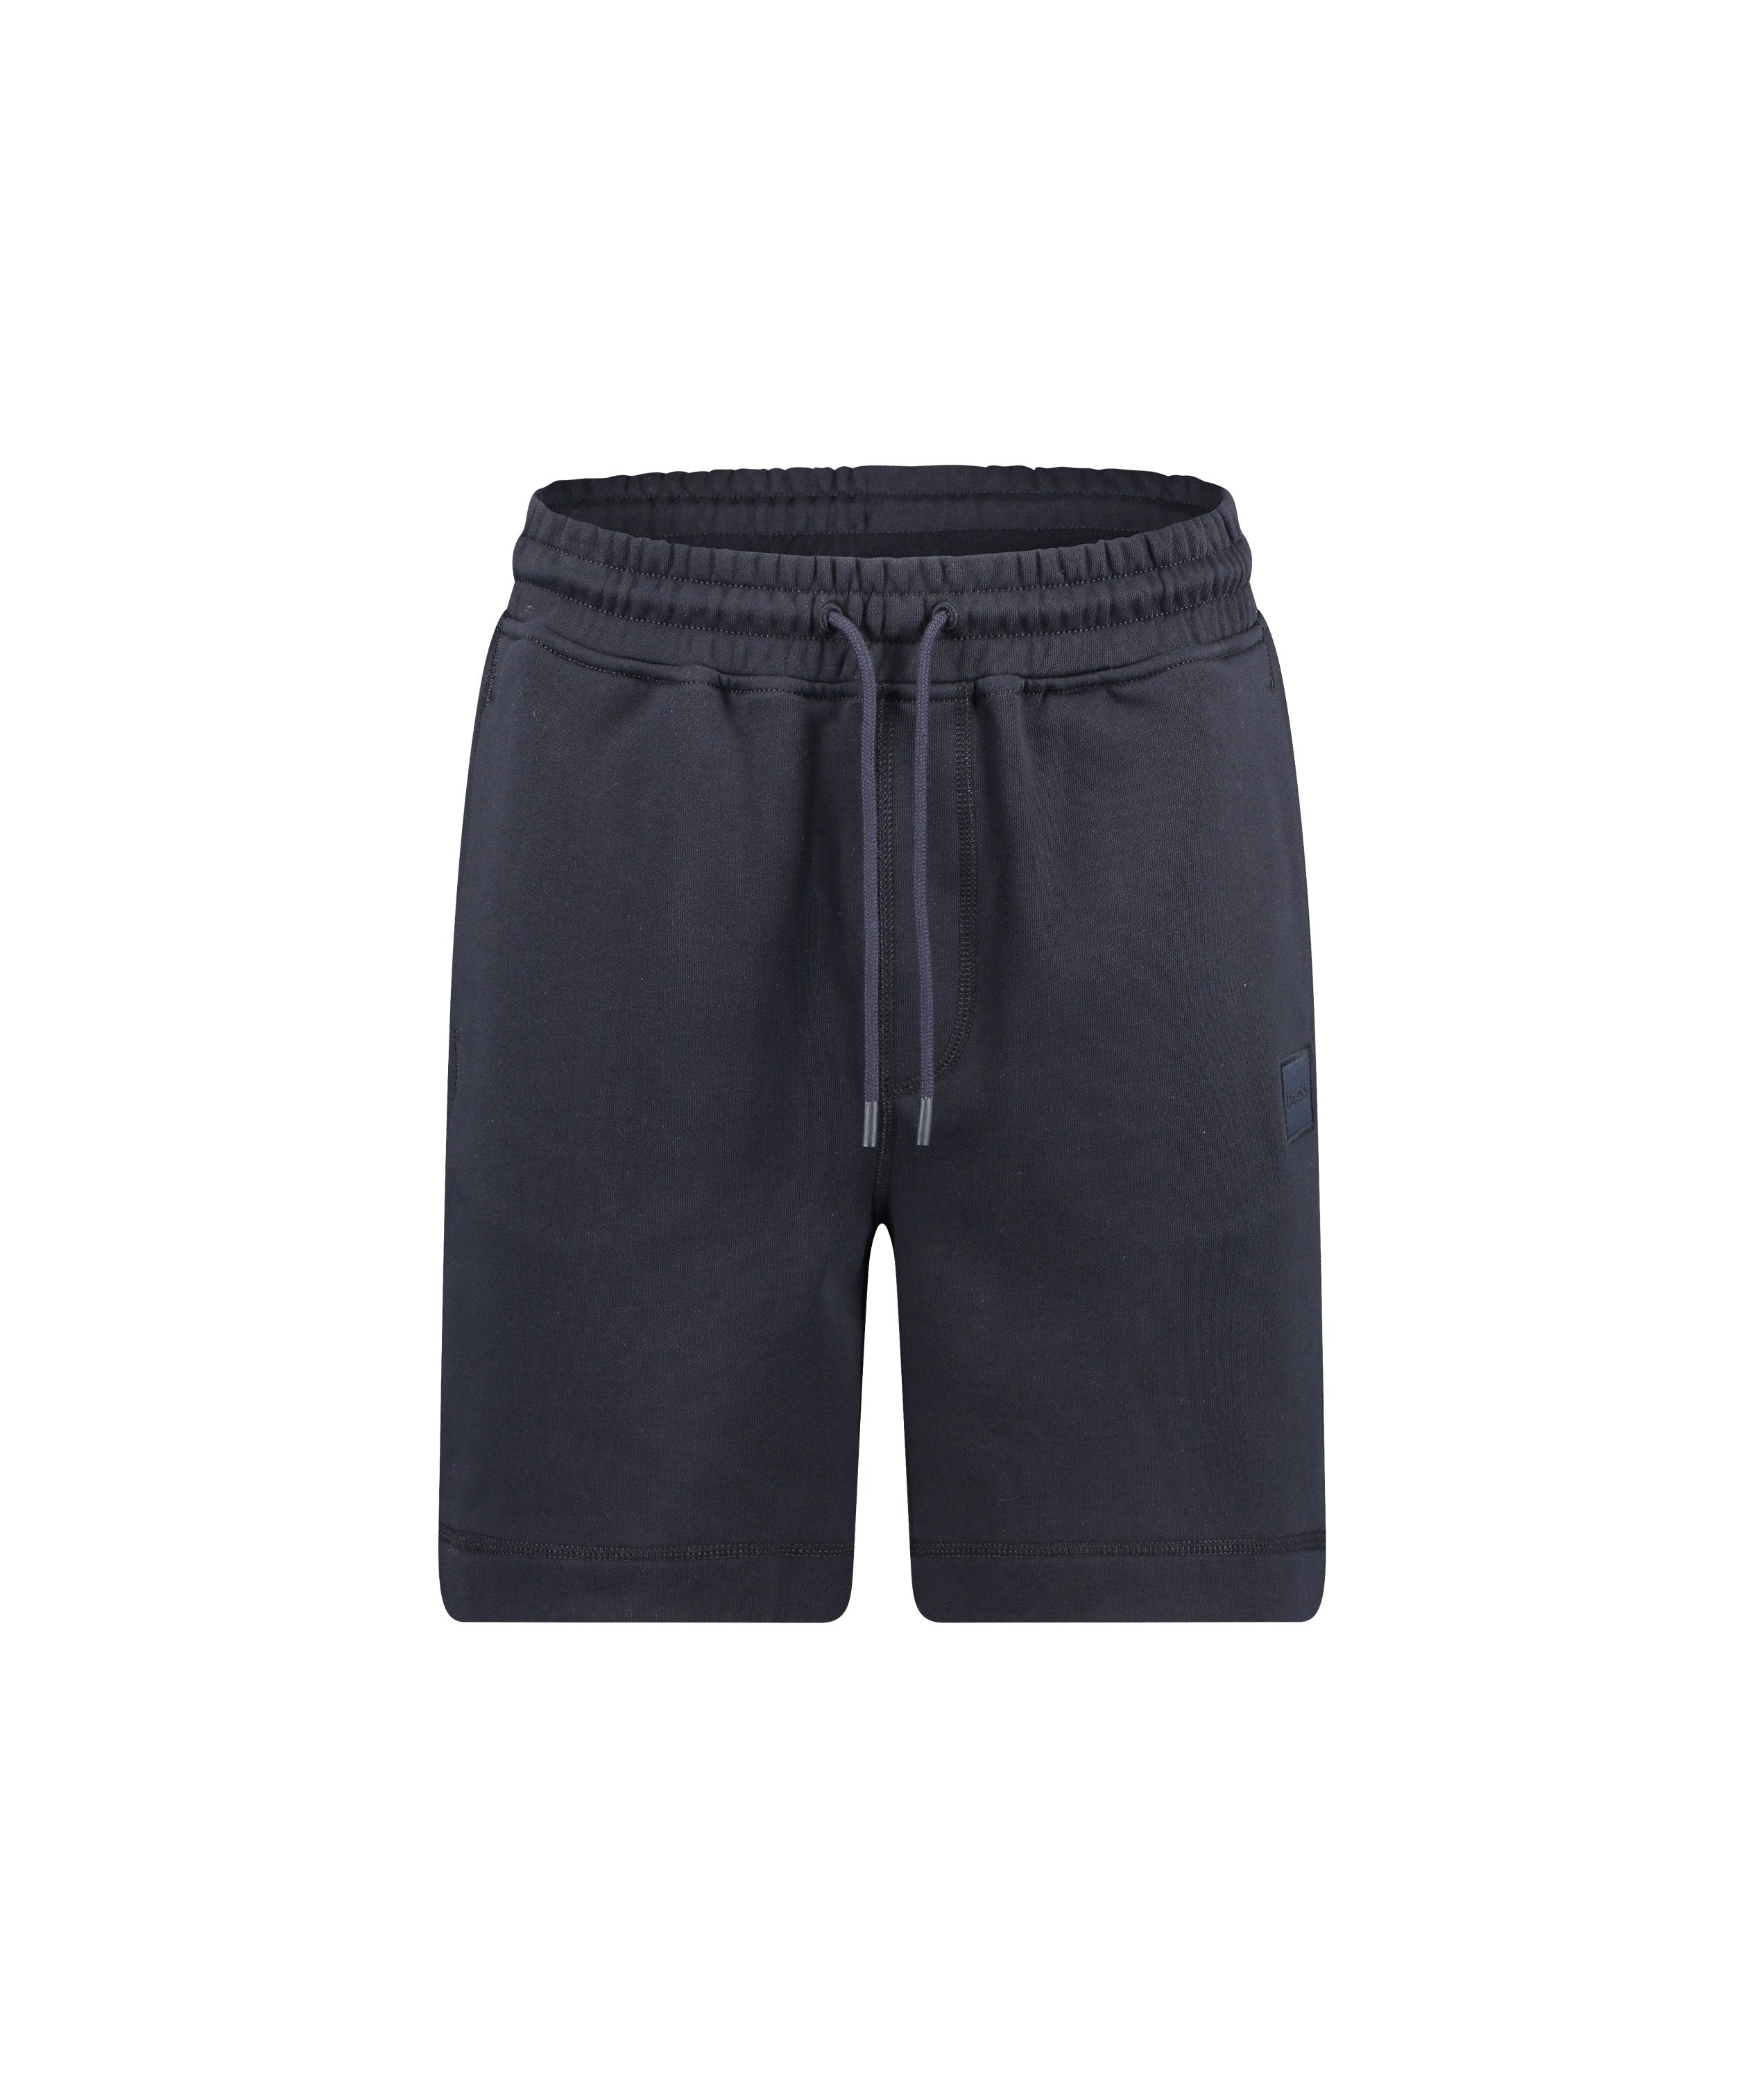 Sewalk Drawstring Shorts in French Terry Cotton with Logo Patch - Navy